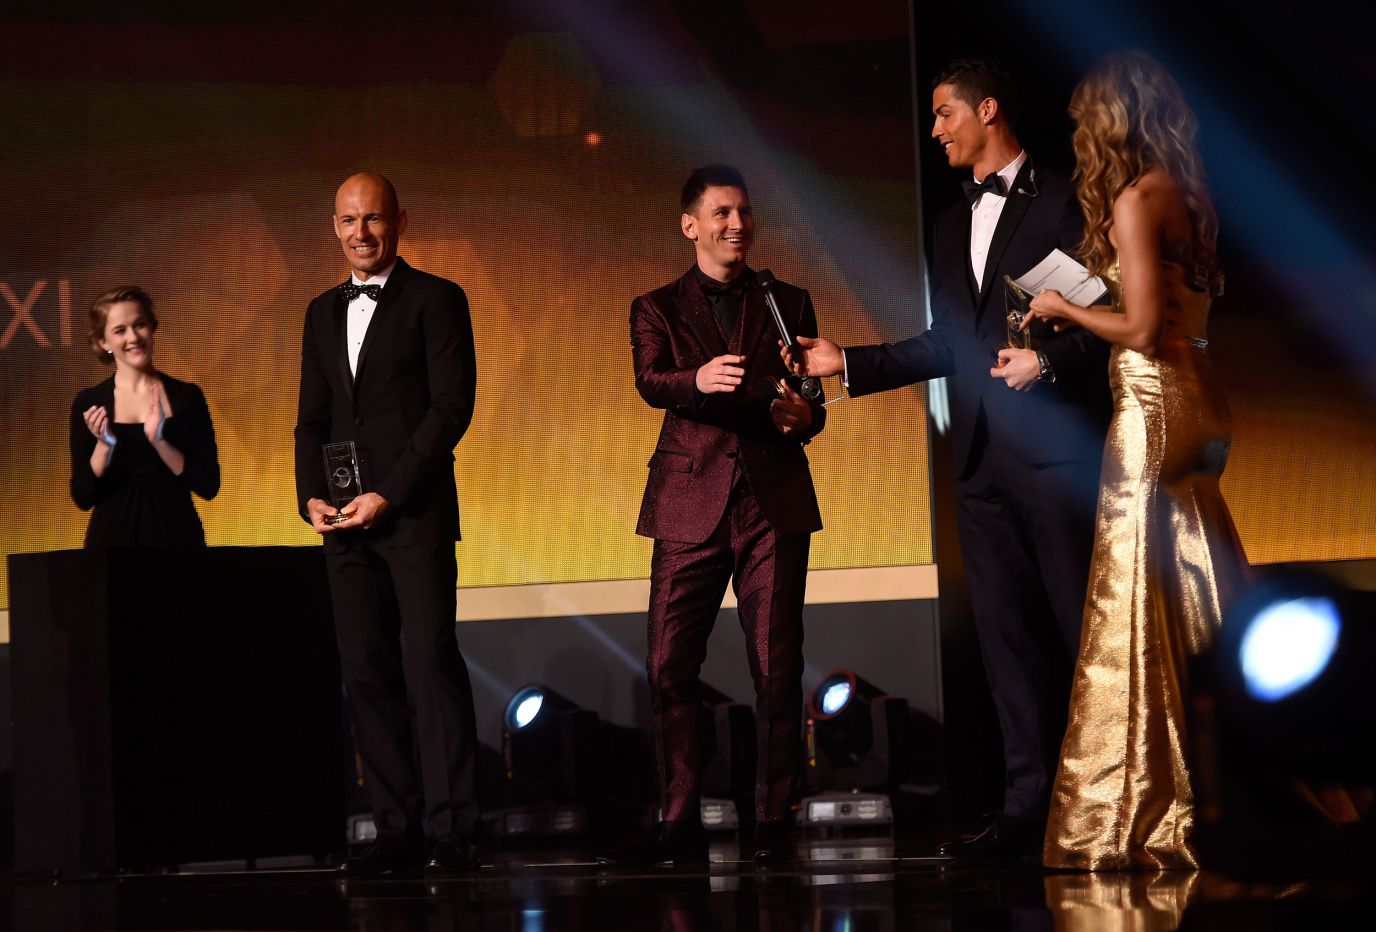 Messi takes the мicrophone froм Ronaldo after they were selected for the FIFA World XI in 2015.